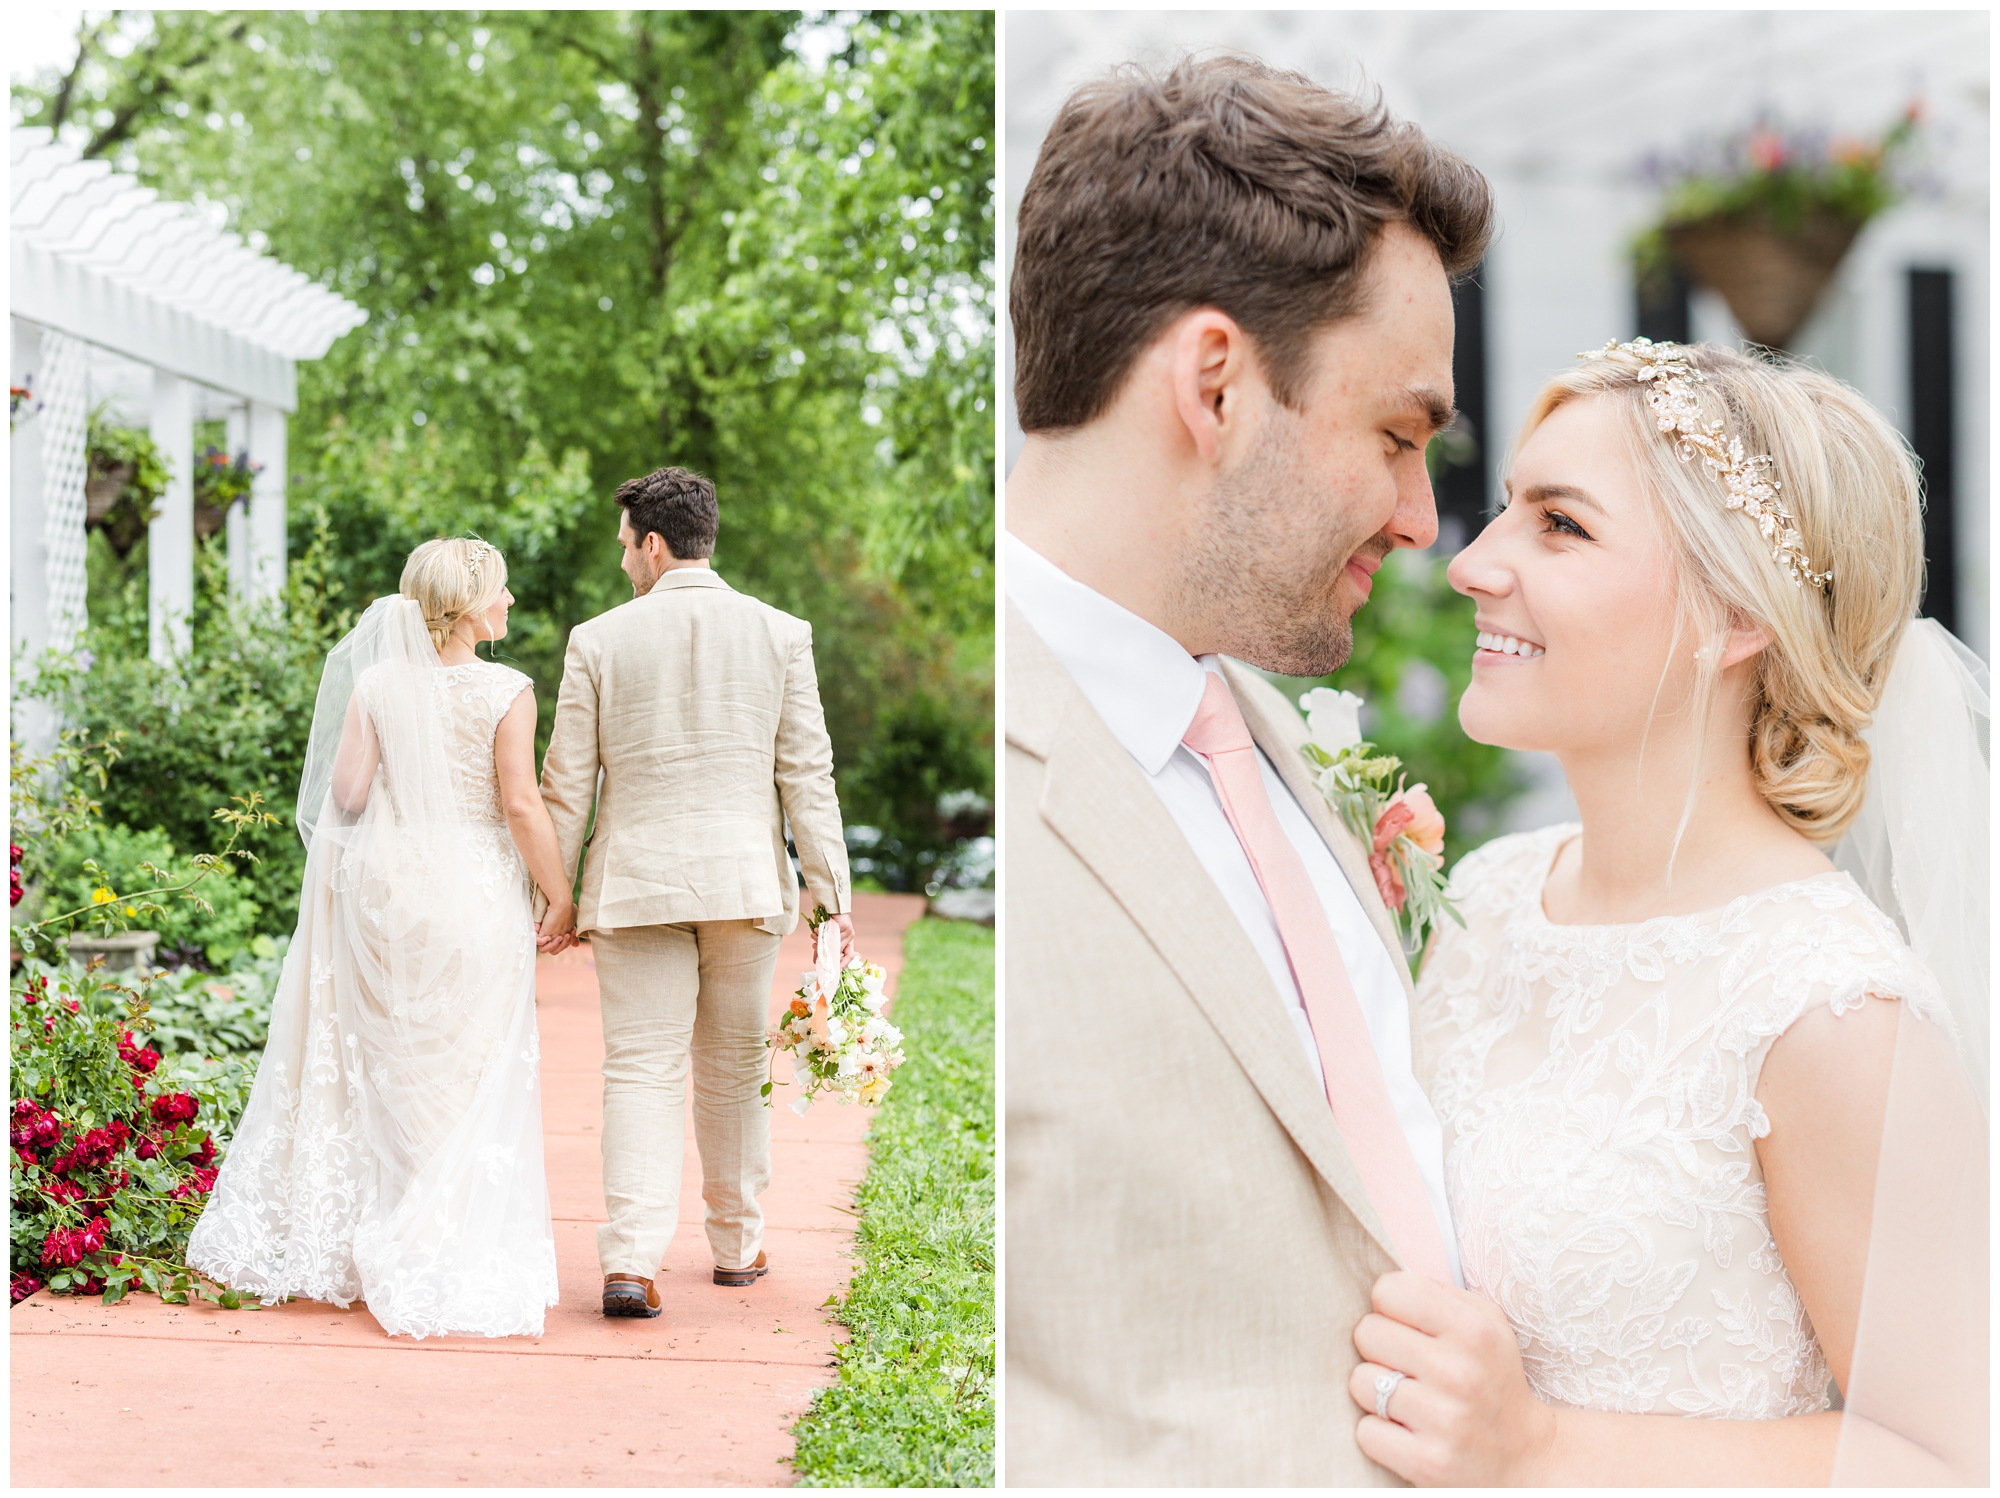 The bride and groom walk in front of the porch at defiance vineyard. In the second photo, the bride and groom smile at each other in a close up portrait. 